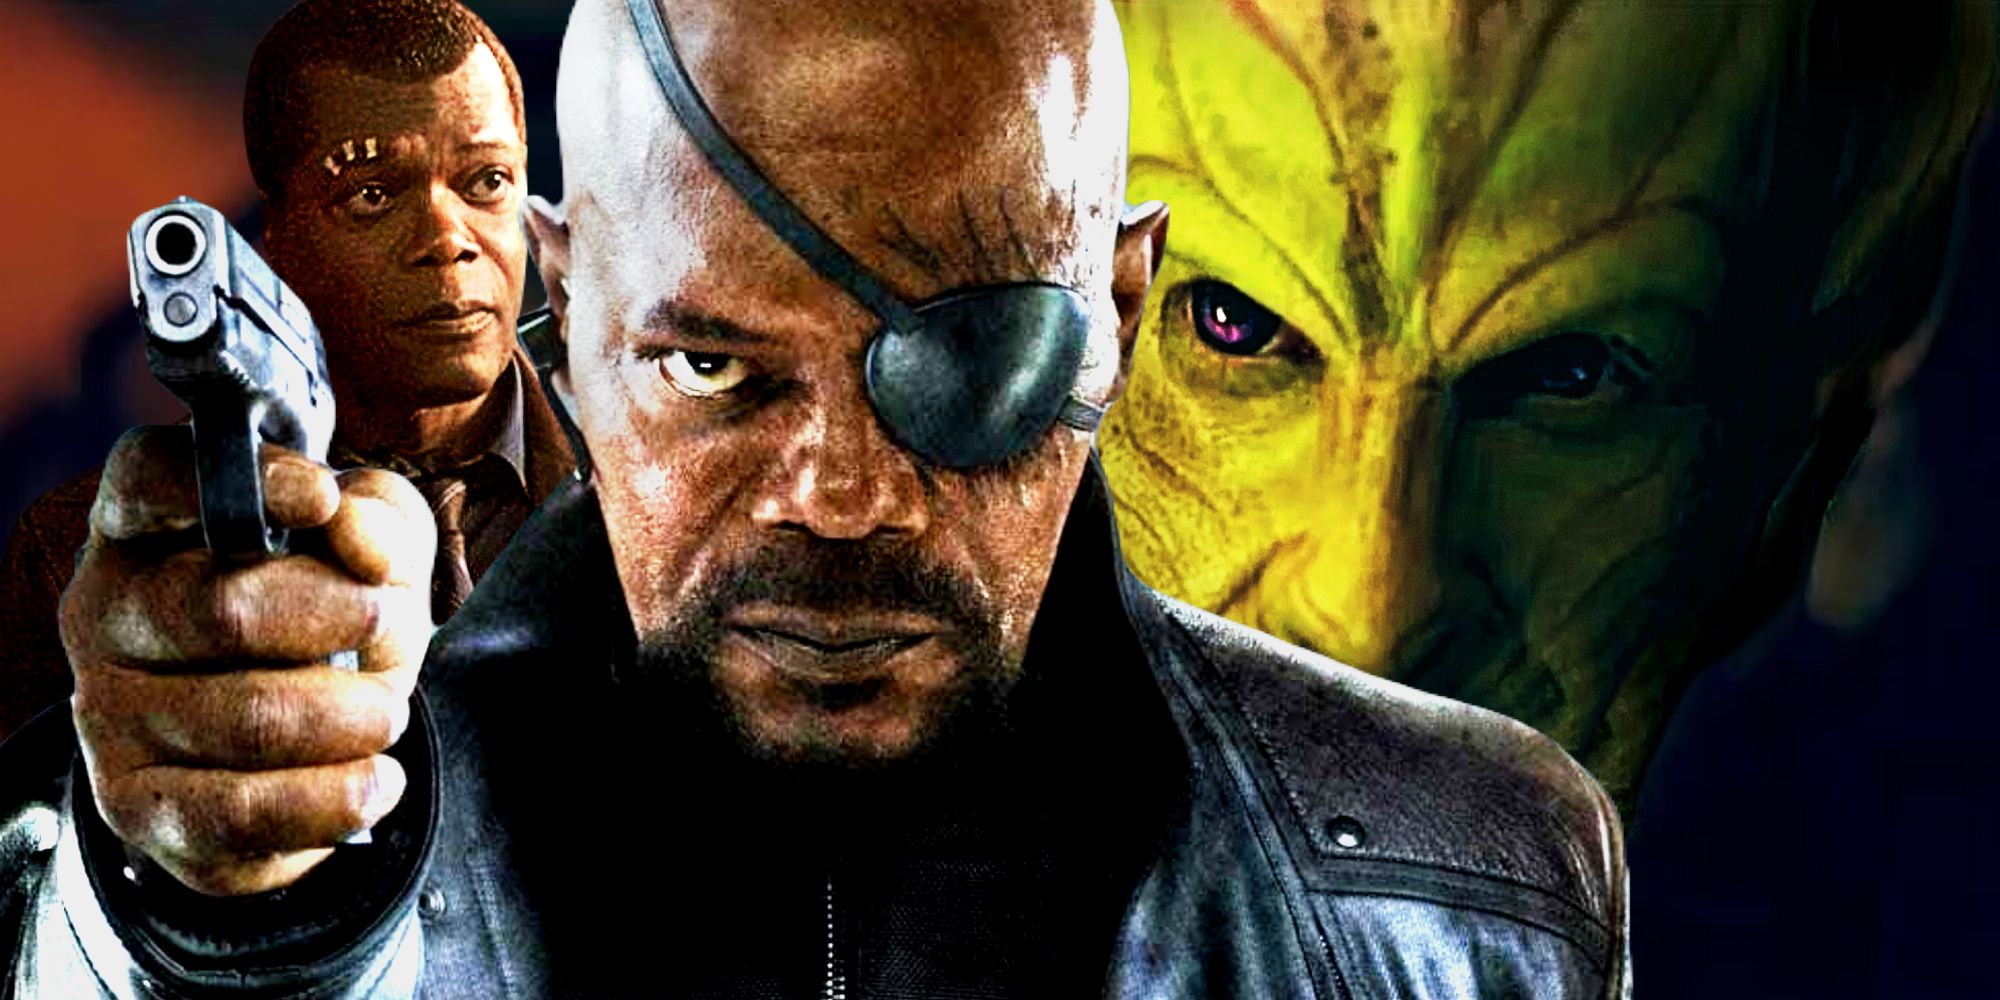 Secret Invasion Finale Preview: Gravik Offers Nick Fury a Final Toast